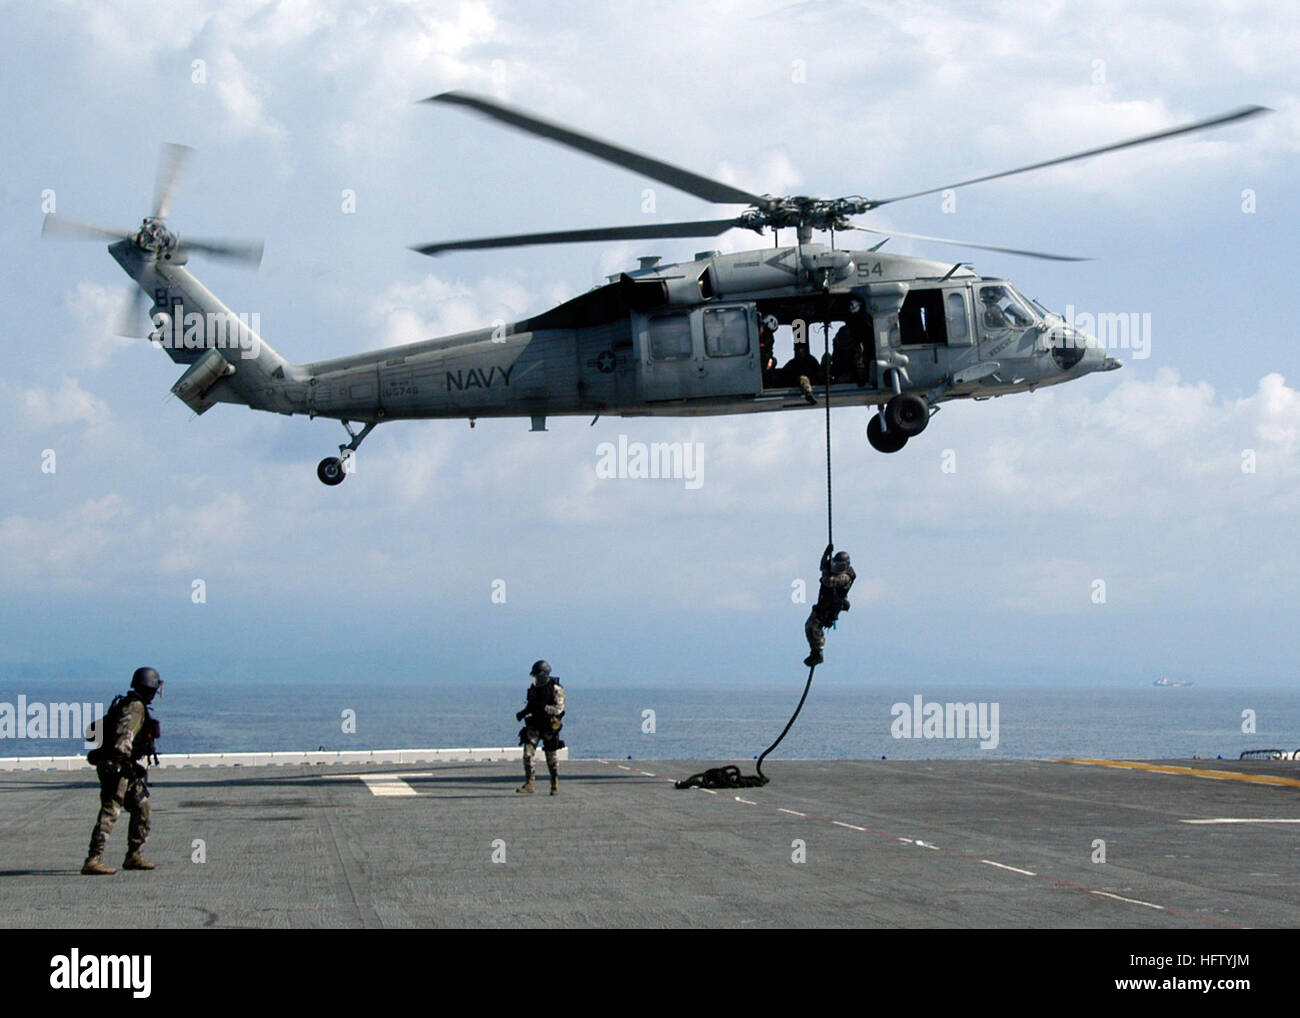 070902-N-3666S-046  CARIBBEAN SEA (Sept. 2, 2007) - French boarding teams rappel out of an U.S. Navy SH-60 Seahawk onto the flight deck of multipurpose amphibious assault ship USS Wasp (LHD 1). Wasp is in Panama as part of the multi-national exercise PANAMAX 2007. Civil and military forces from 19 countries are participating in PANAMAX, a U.S. Southern Command joint and multi-national training exercise co-sponsored with the government of Panama, in the waters off the coast of Panama in Honduras. U.S. Navy photo by Mass Communication Specialist 3rd Class Robbie Stirrup (RELEASED) US Navy 070902 Stock Photo